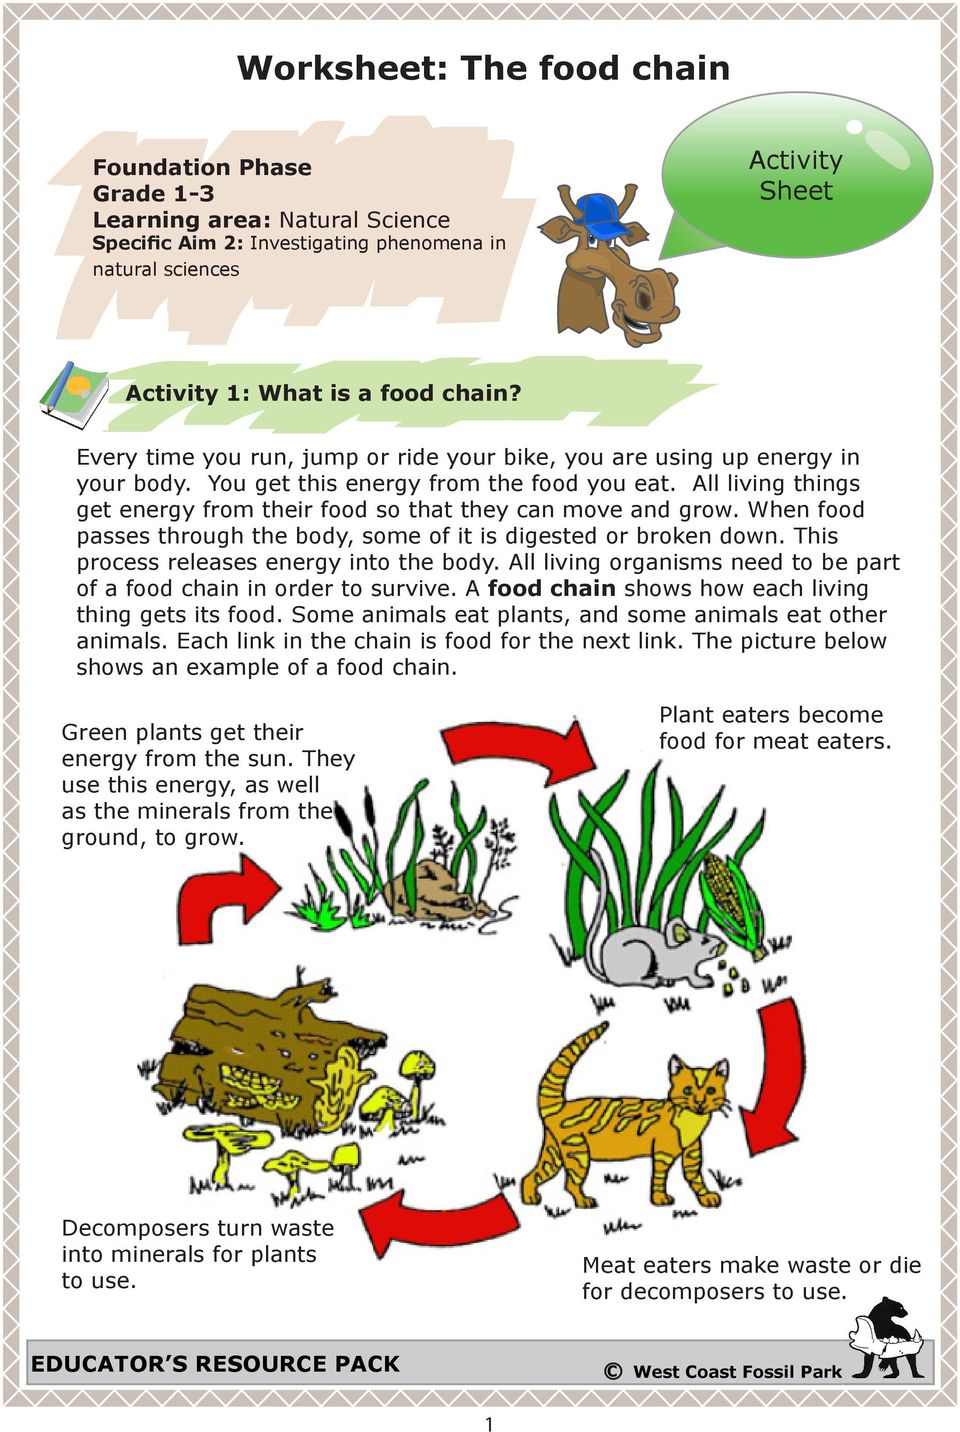 Worksheet: The food chain - PDF Free Download